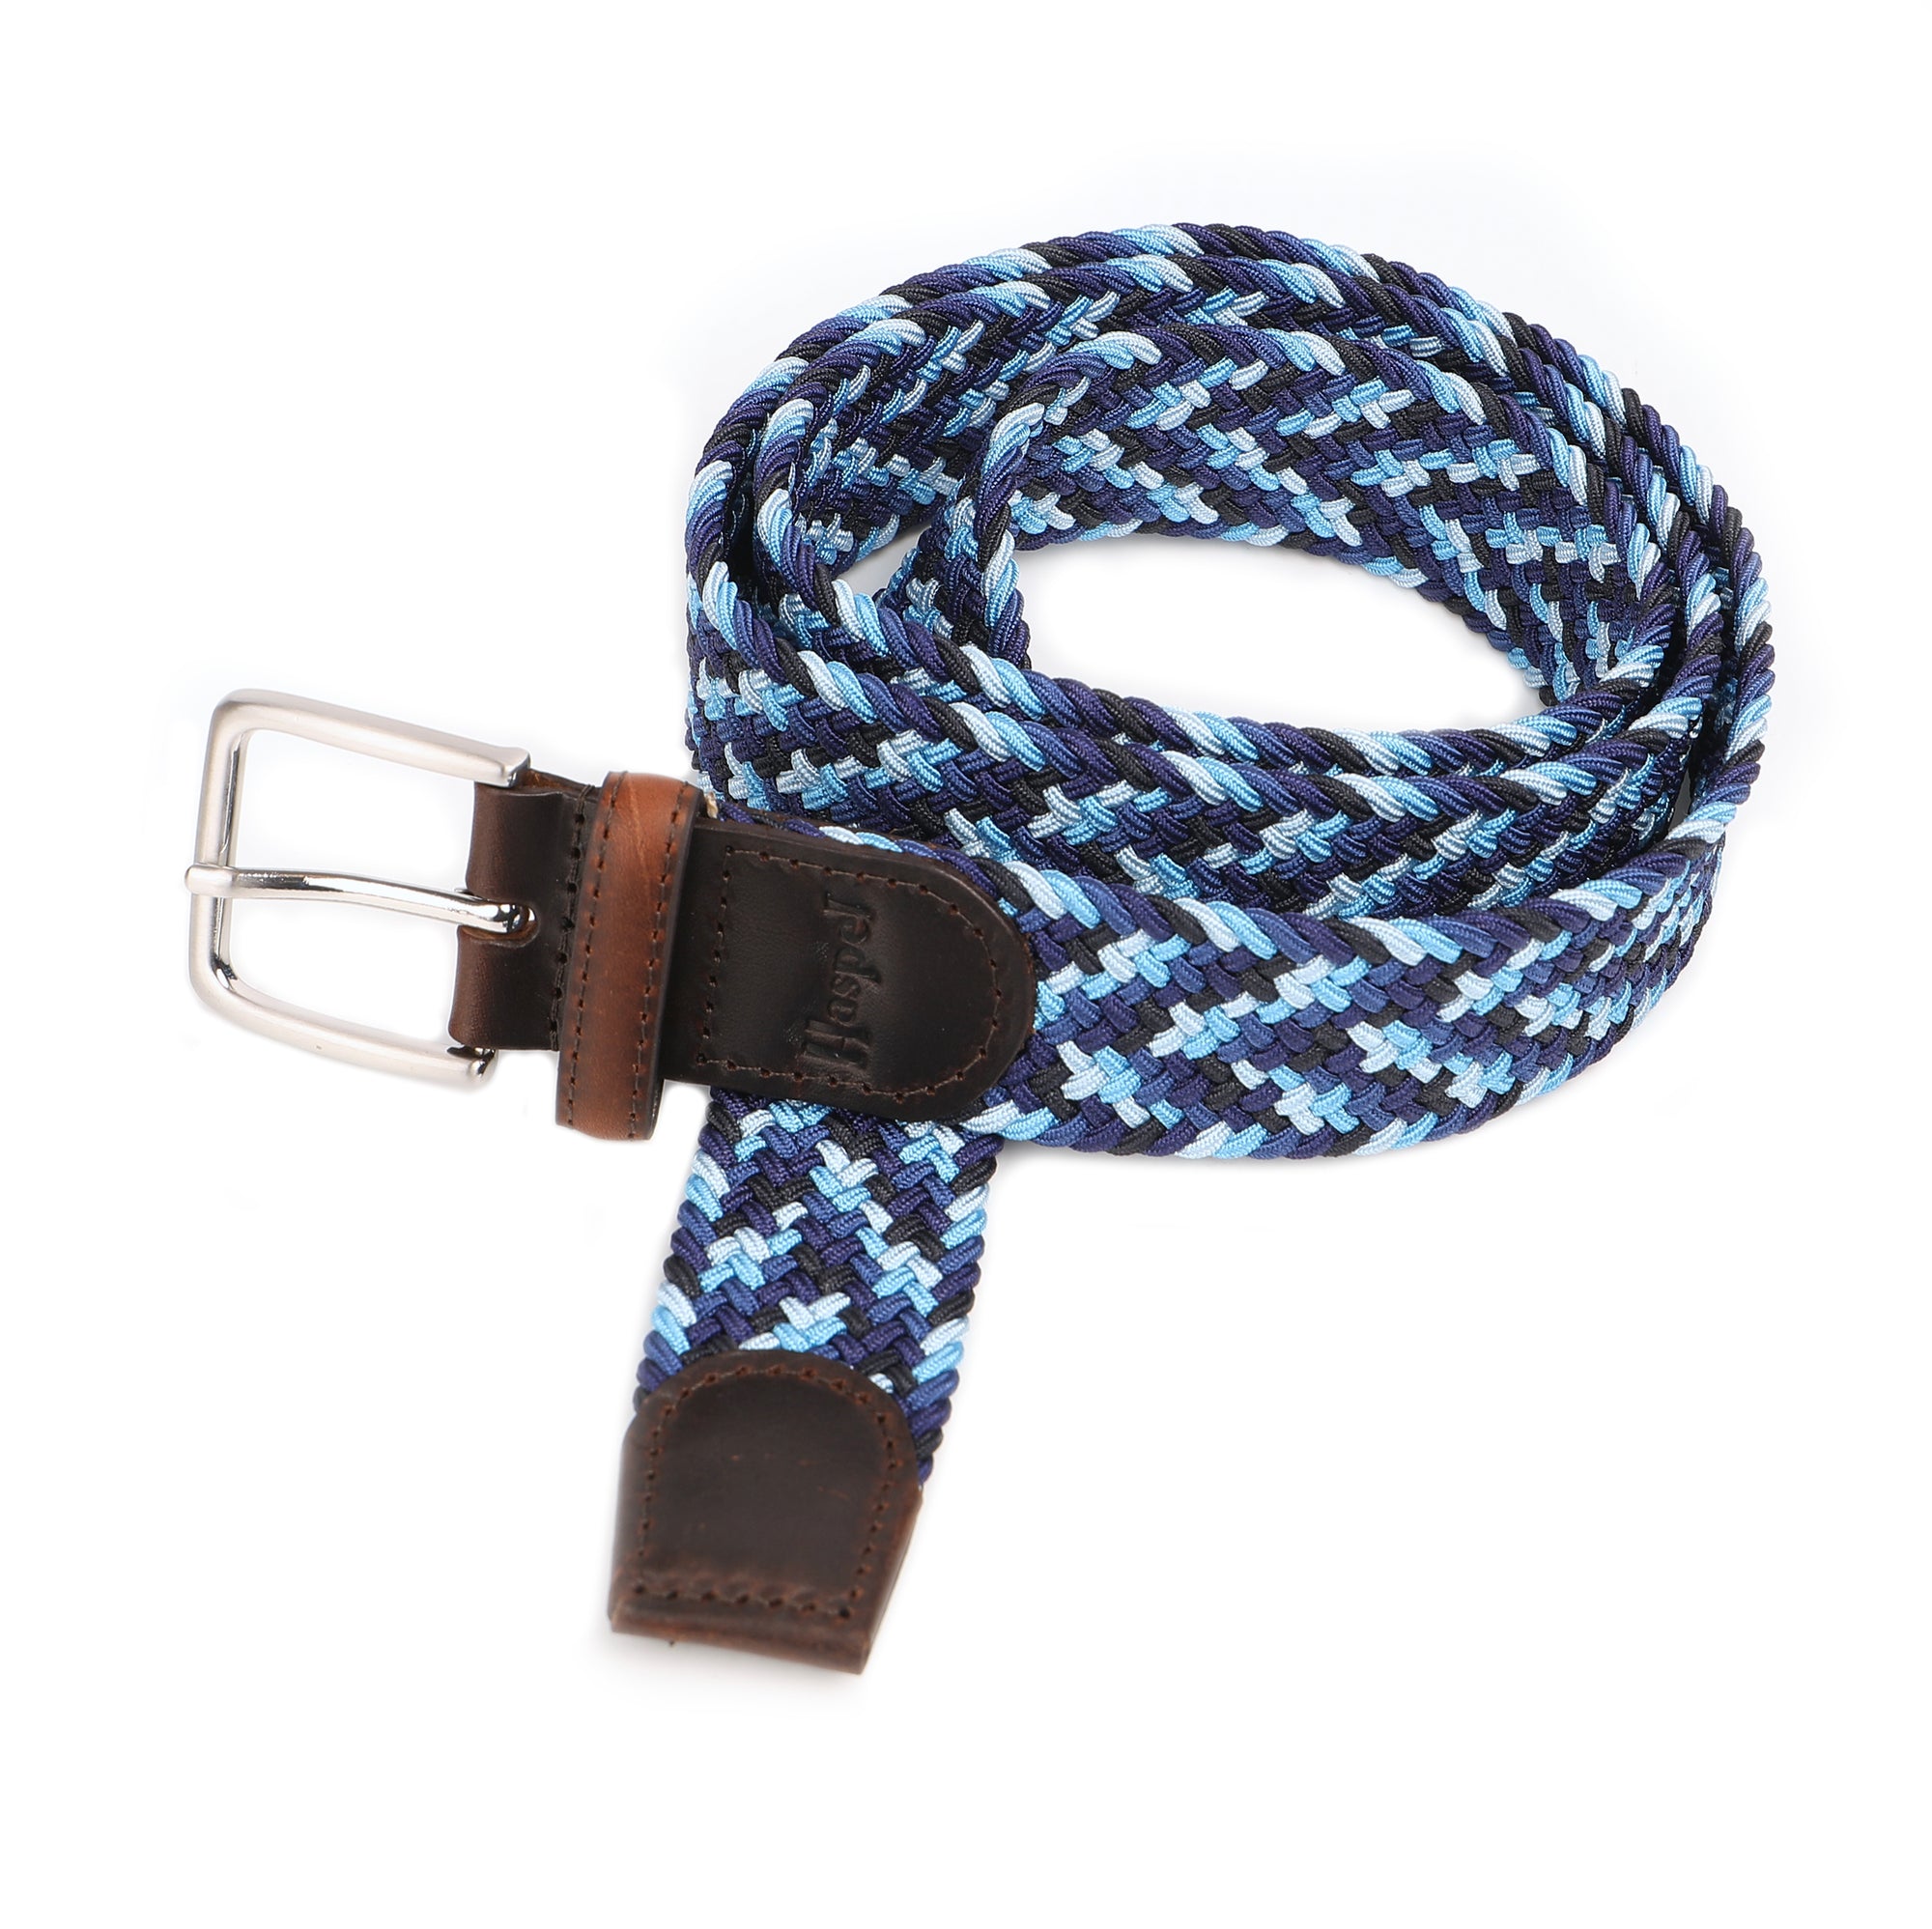 Our braided belts are woven to add a rich style to any look. Featuring leather end tabs, a solid nickel buckle with antique finish, and color choices in both solid and mult-colored of braided elastic.  Alpha Sizing • Braided elastic • Leather End Tabs • 1-1/4" Wide • Solid Nickel Buckle, Antique Finish • Imported